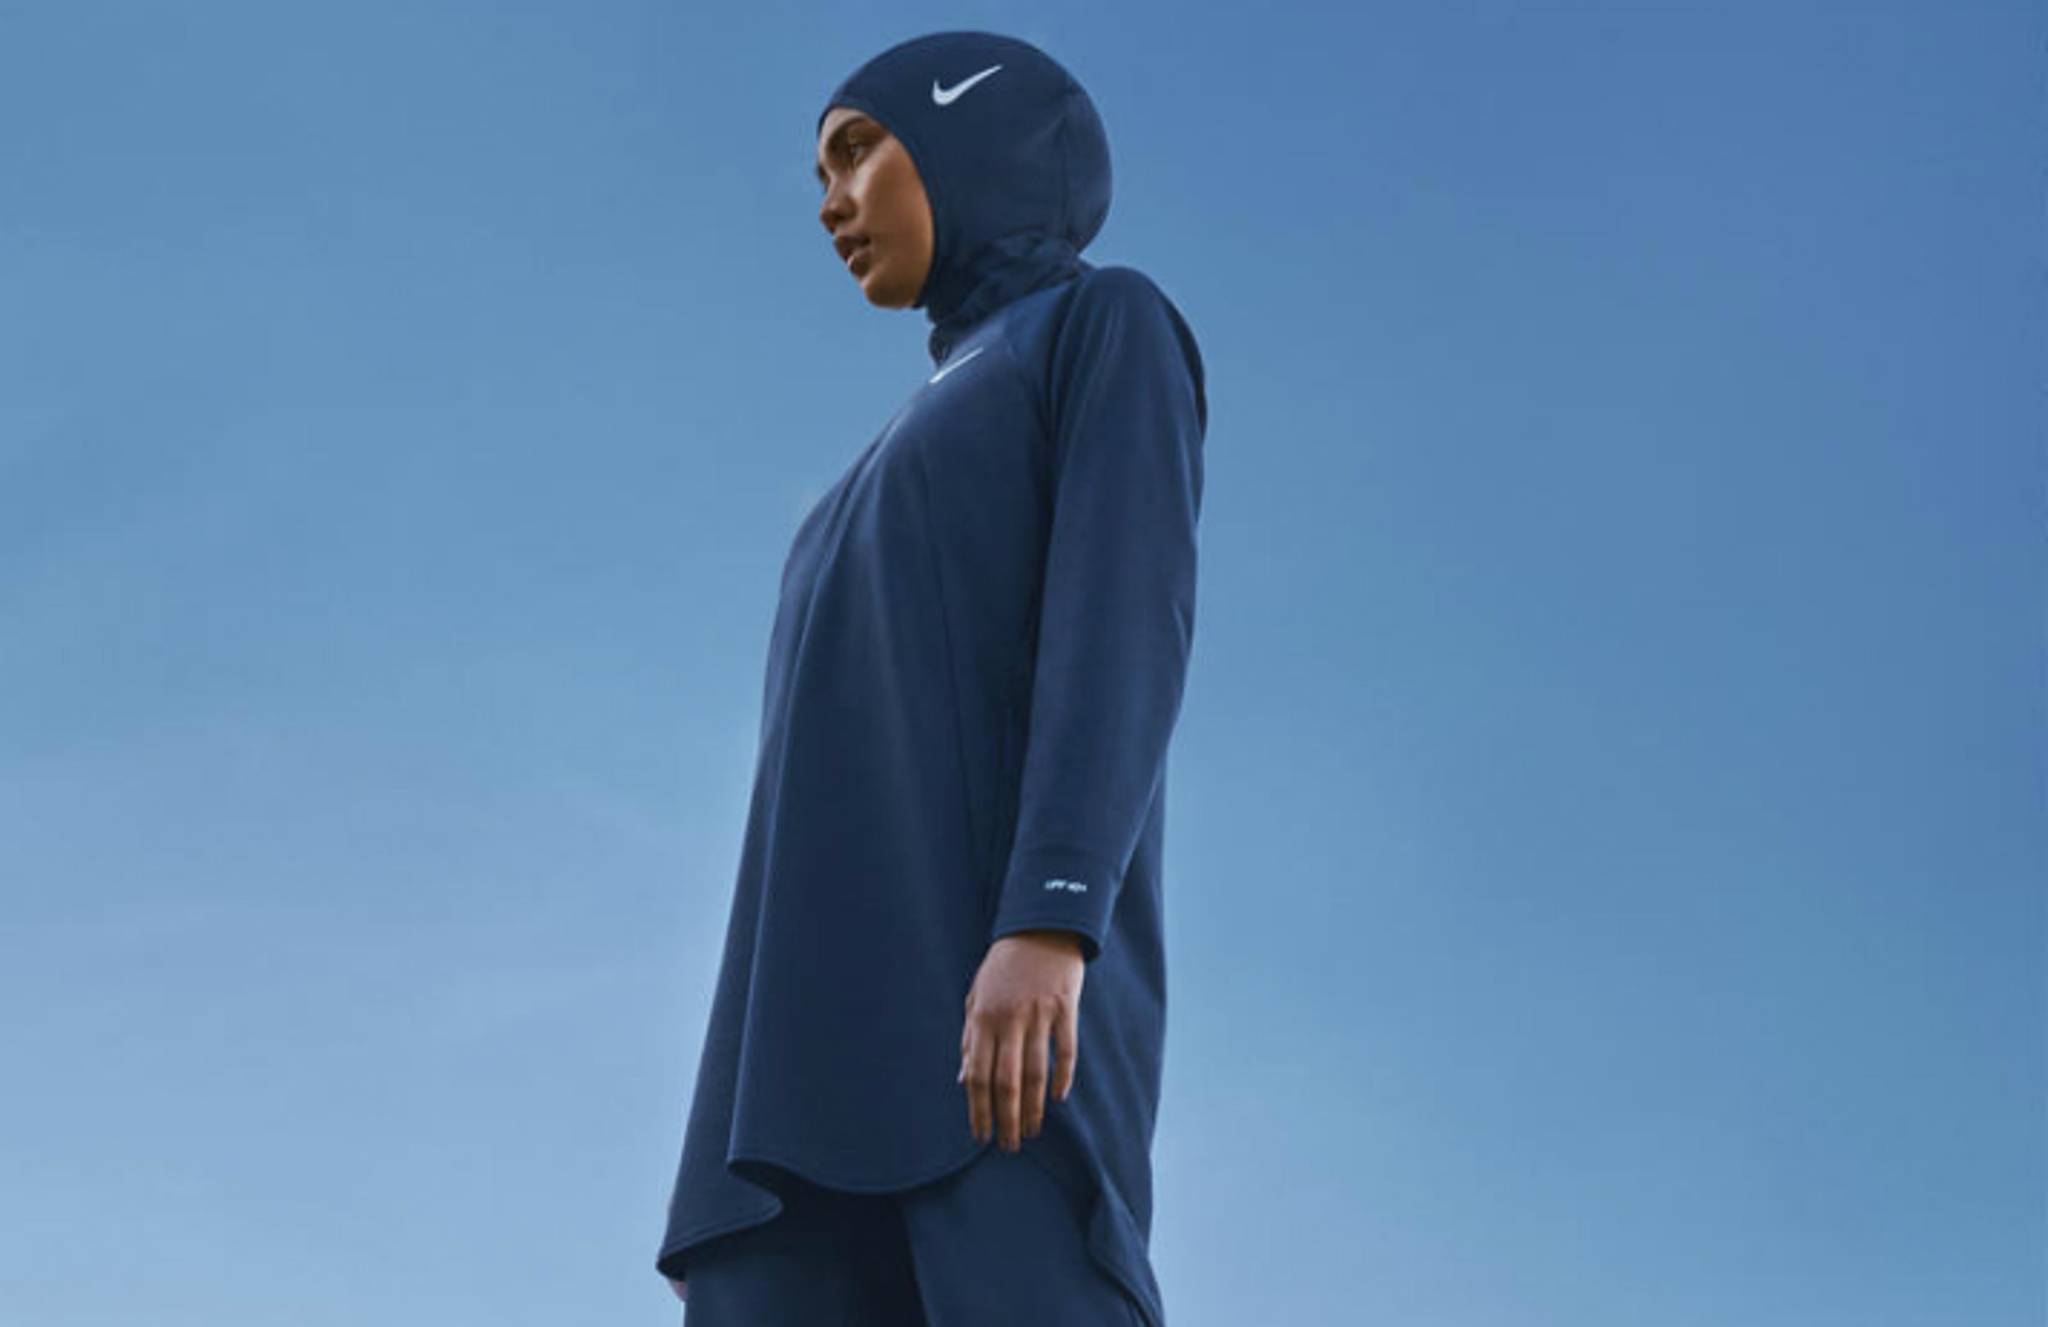 Nike's modesty swimsuit makes sport more inclusive